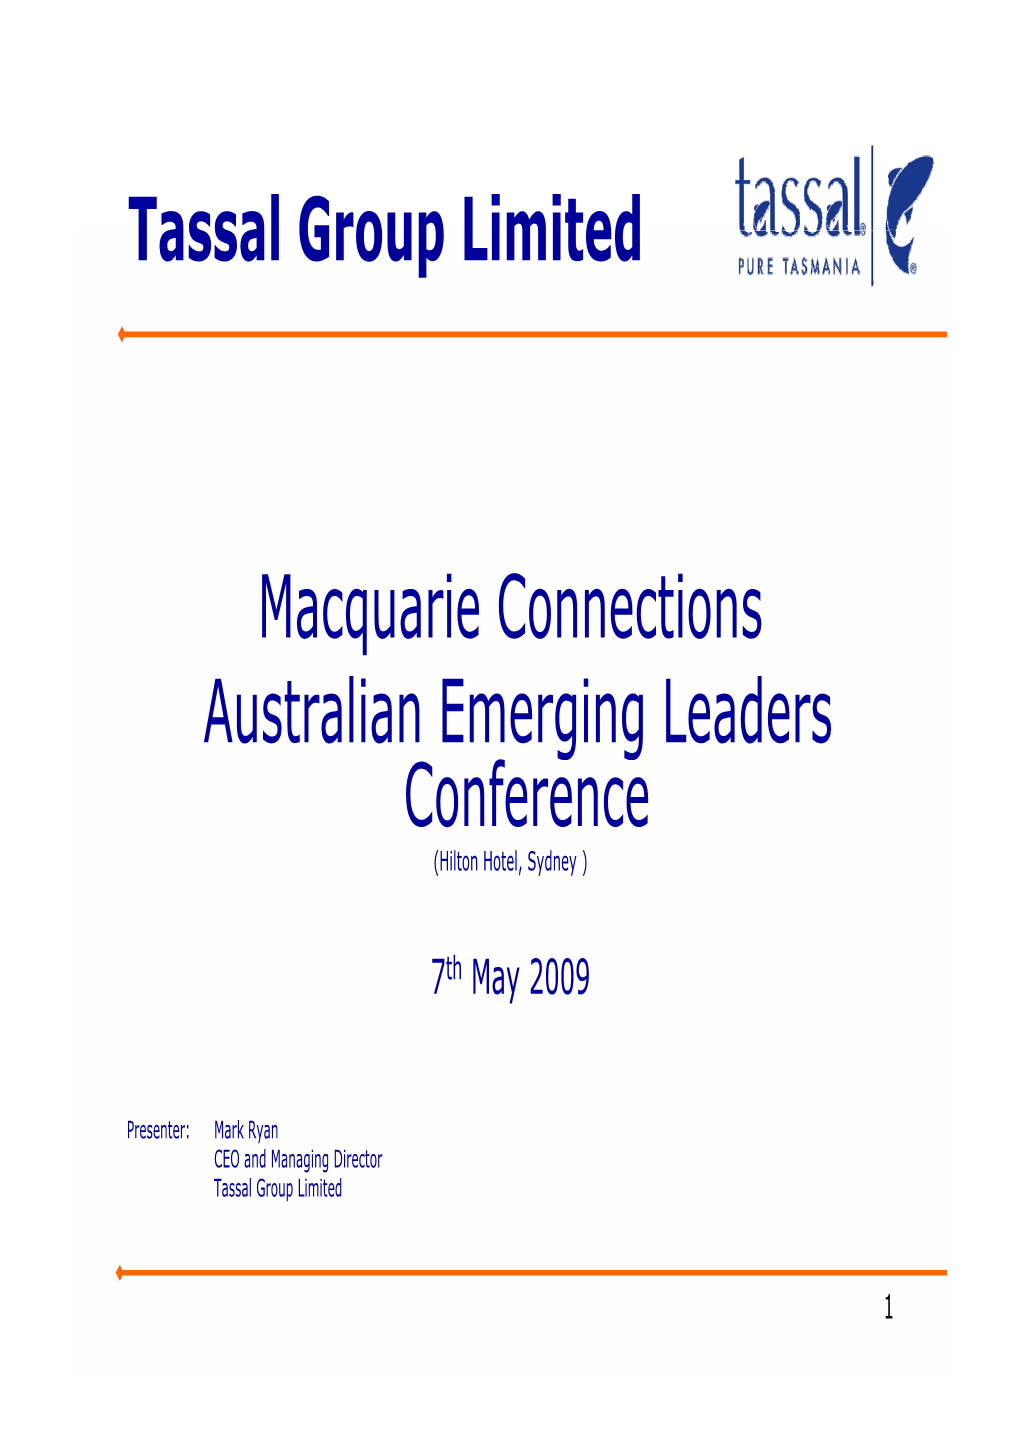 Tassal Group Limited Macquarie Connections Australian Emerging